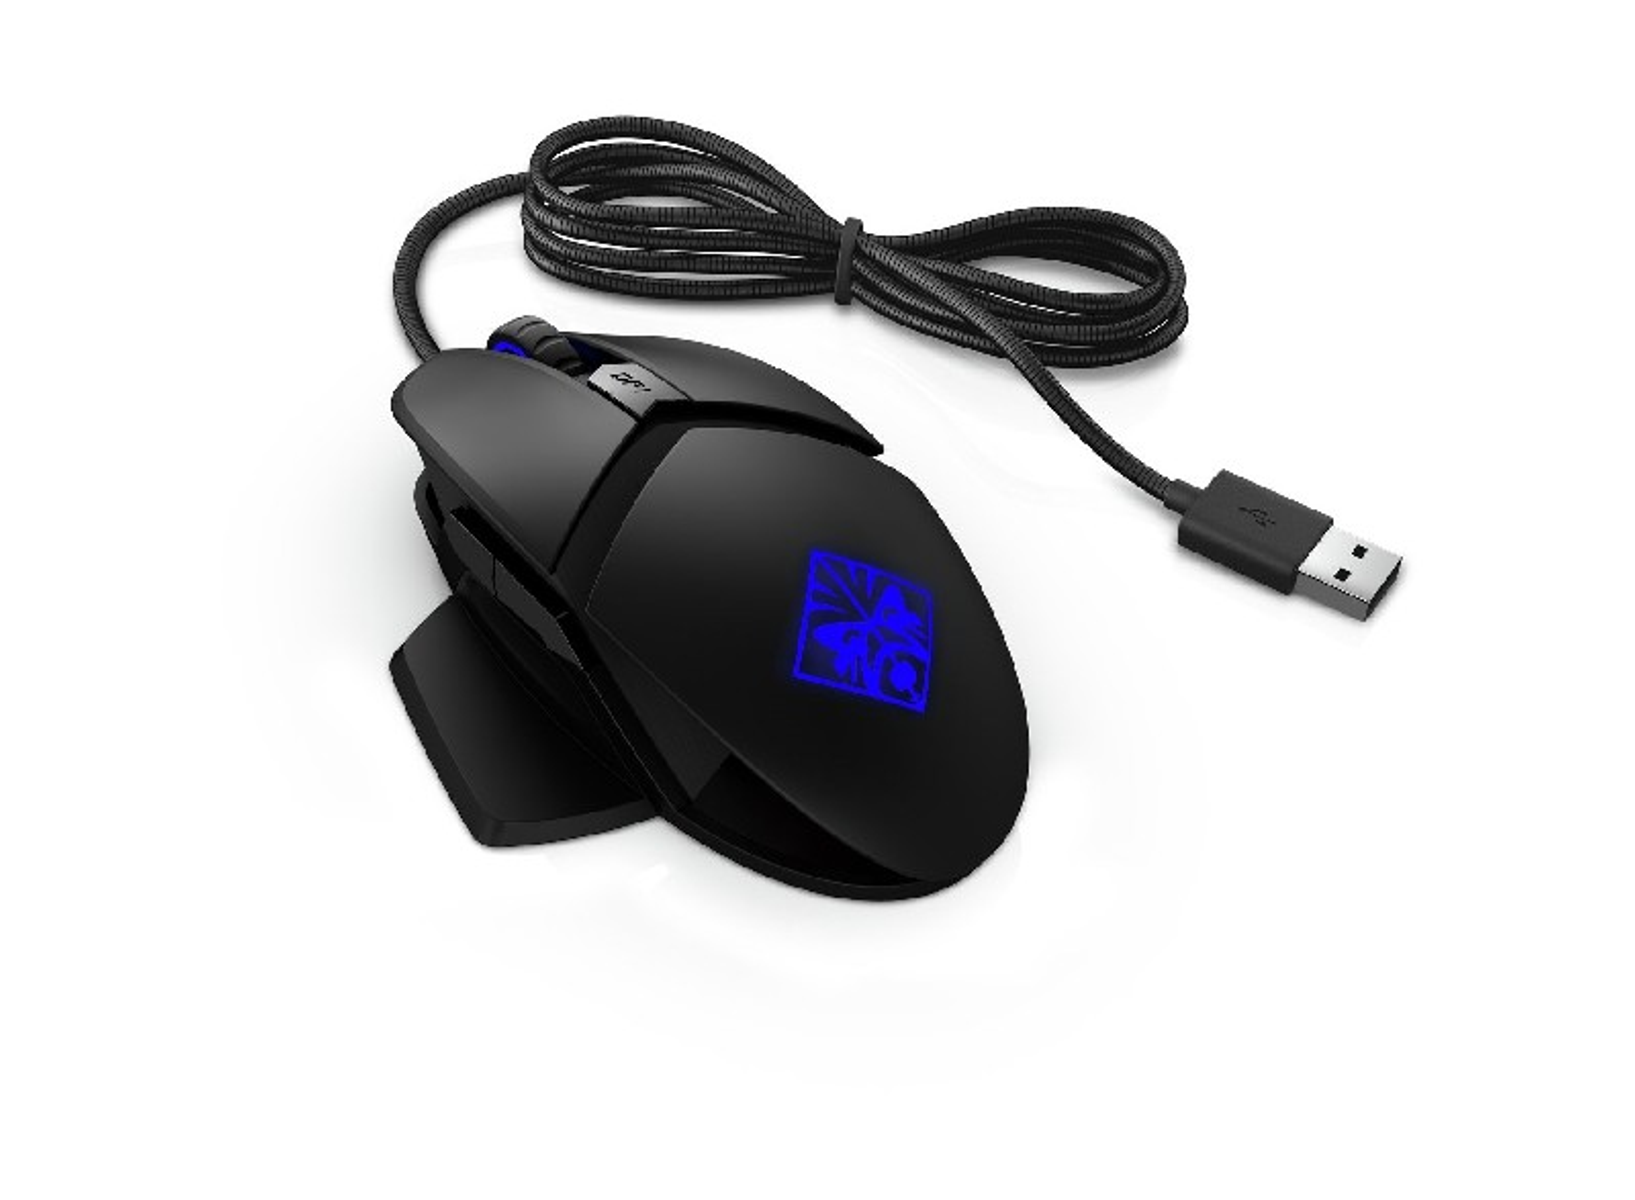 HP 2VP02AA OMEN BY HP REACTOR Gaming-Maus, Schwarz MOUSE